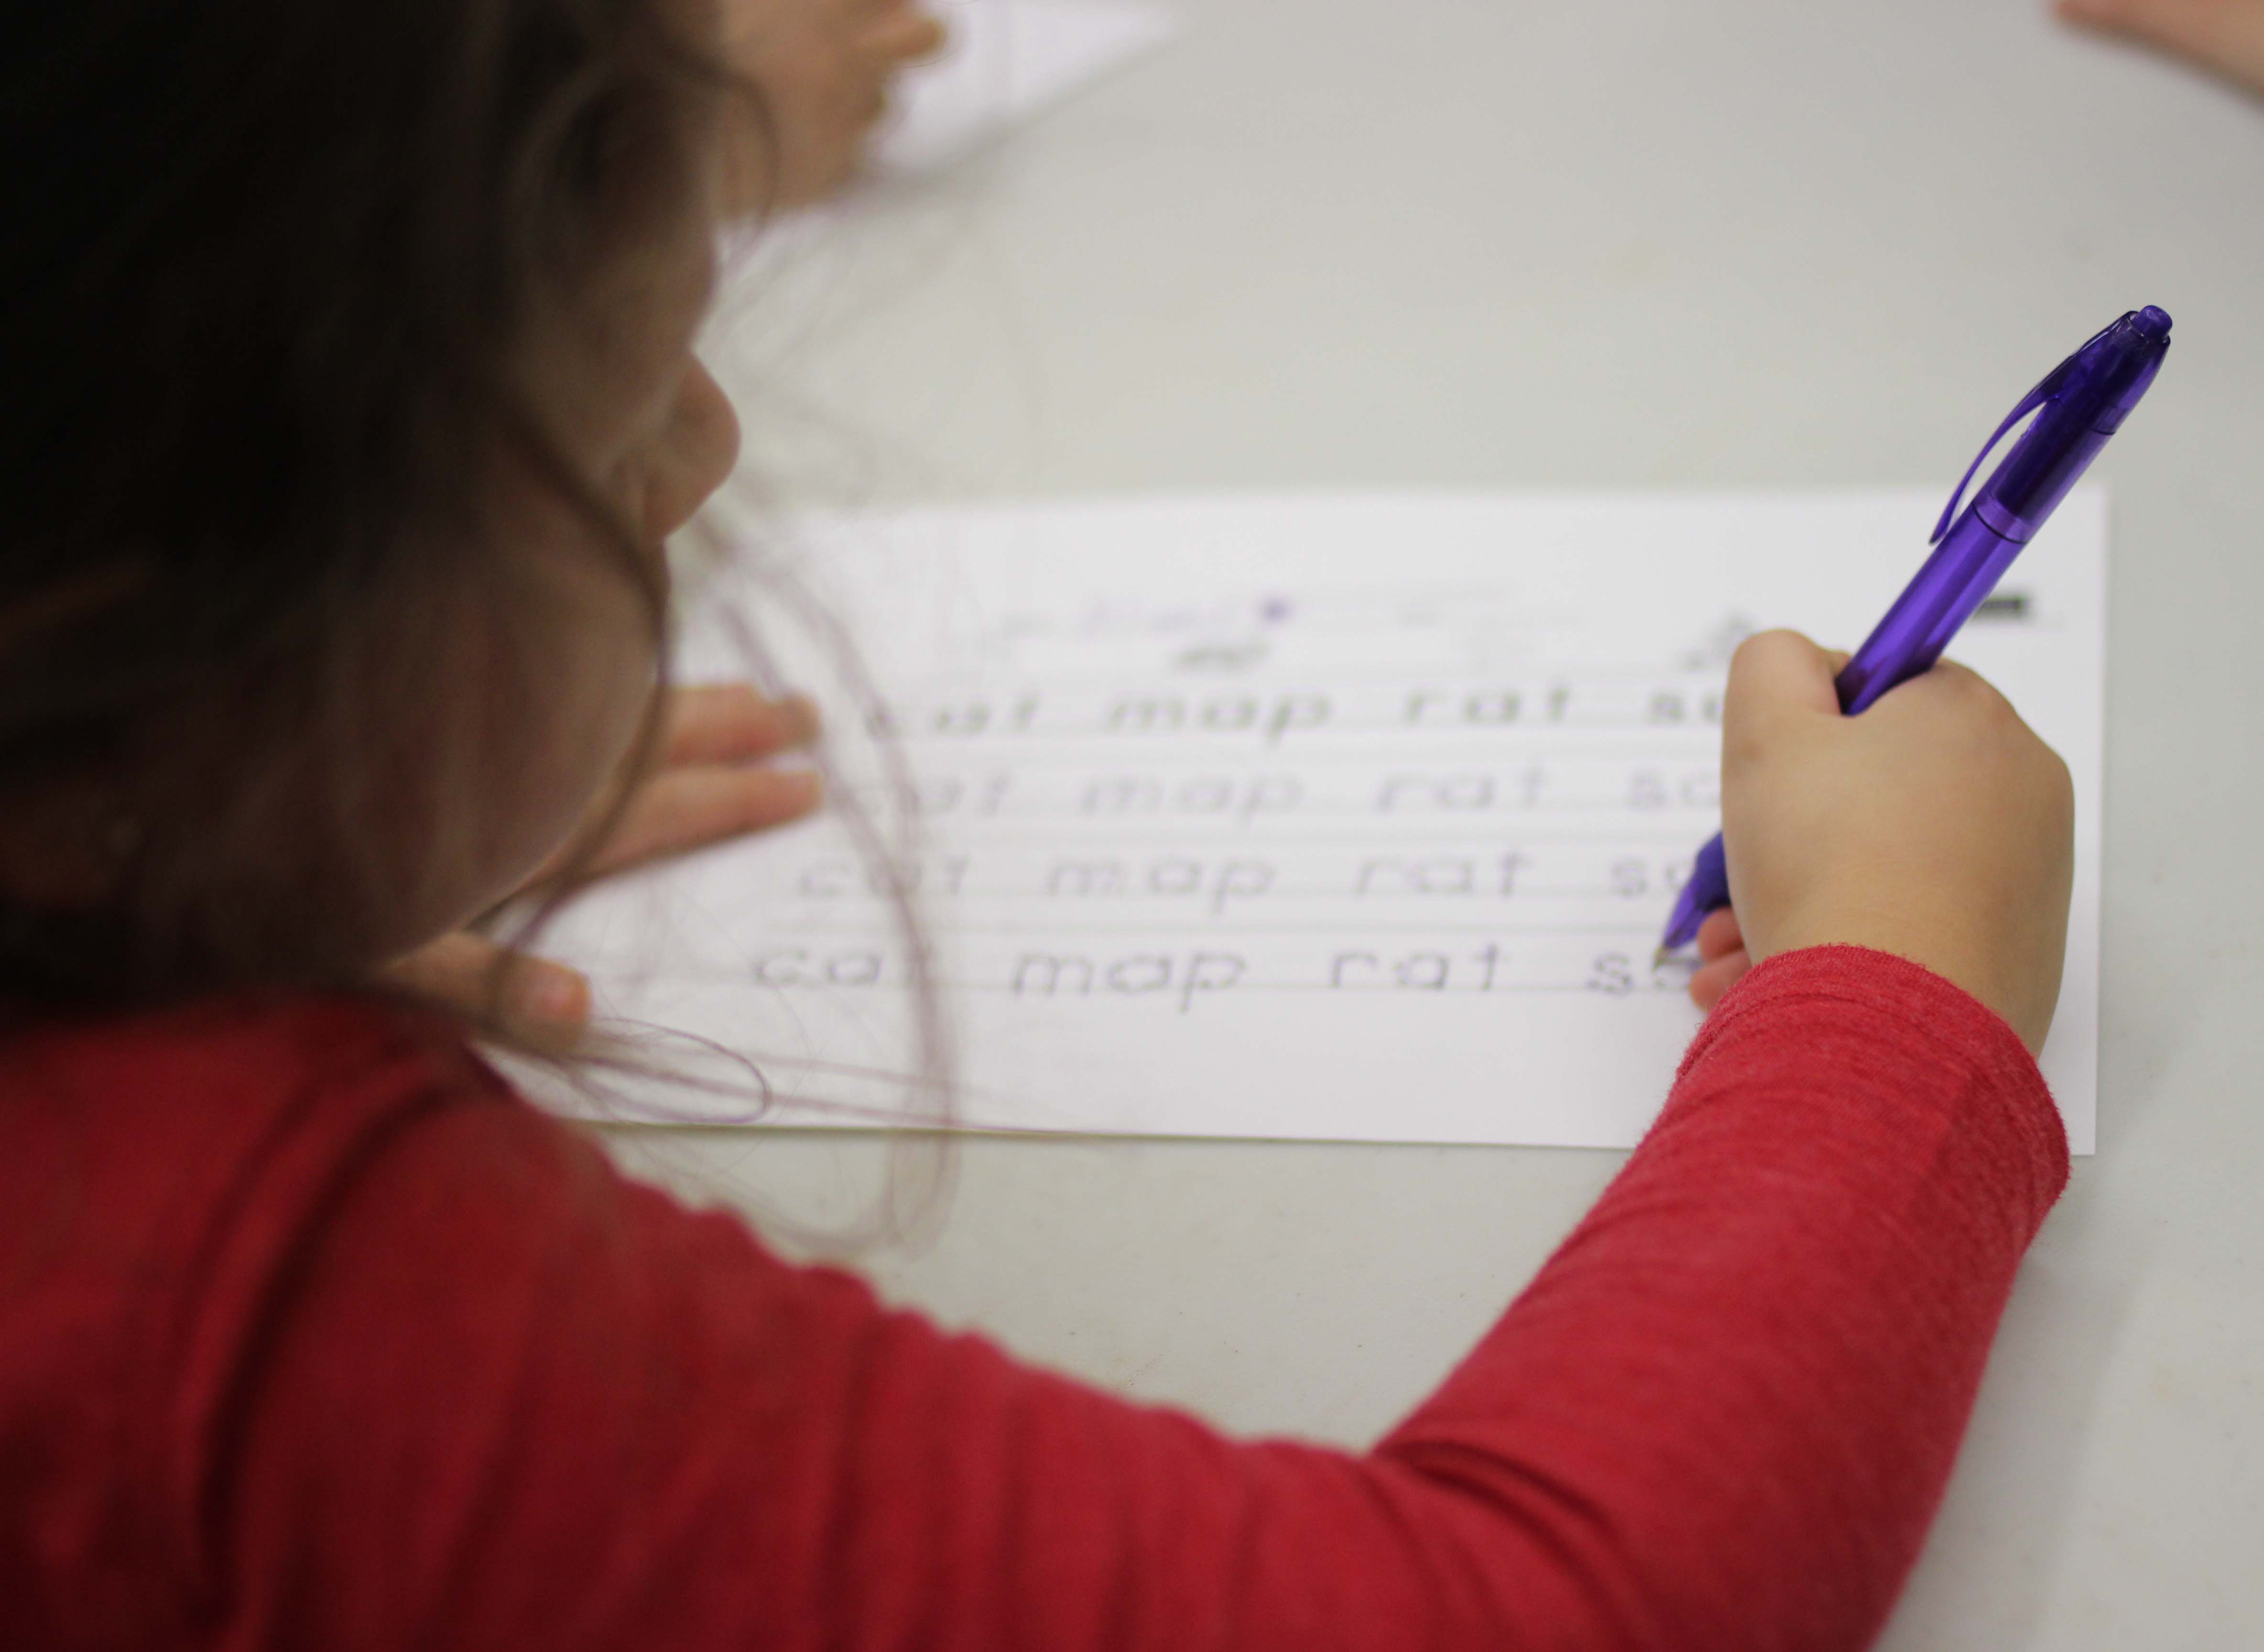 A young girl traces letters on paper.